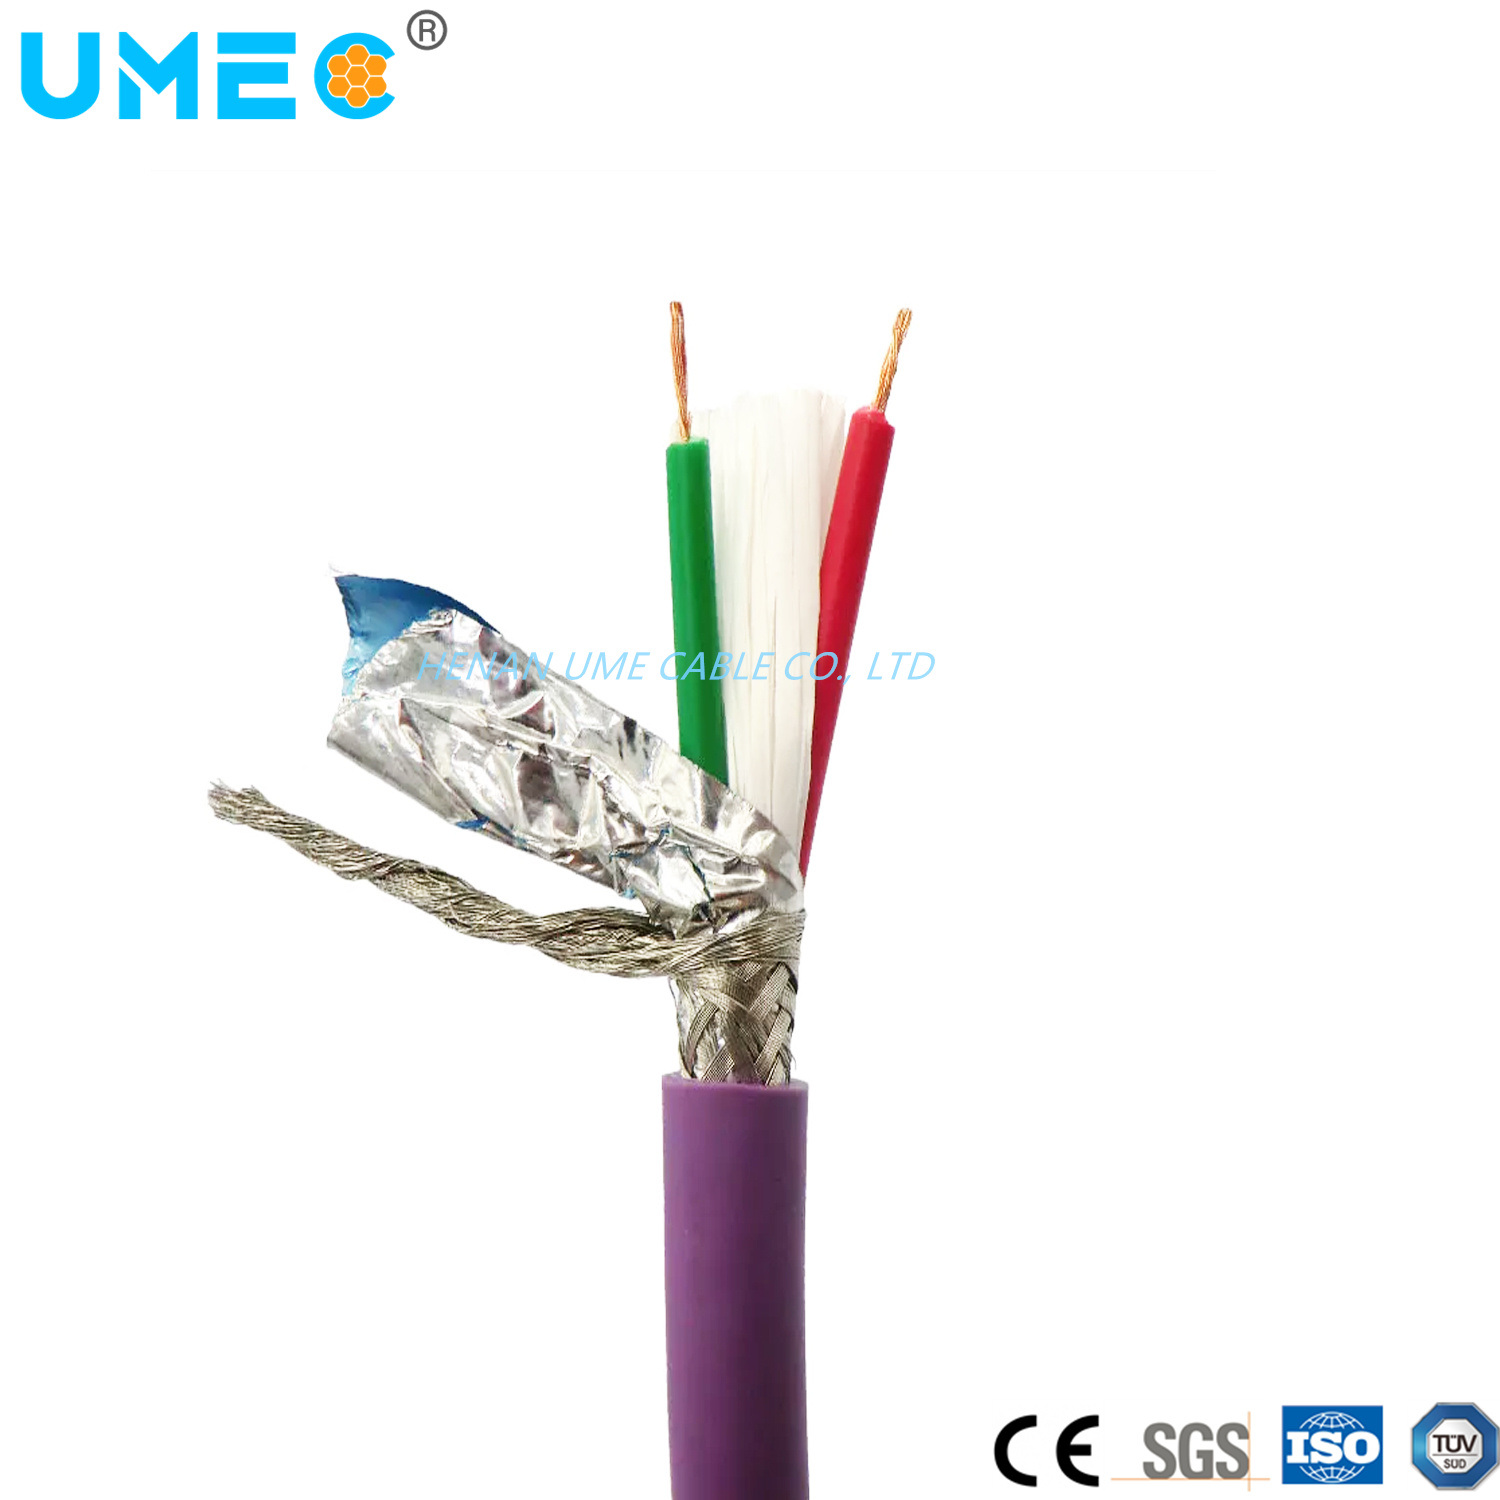 IEC Standard Multiconductor Cable, 2cx22AWG Solid Tc, PE Ins Foil&Braid Violet 6xv18300eh10